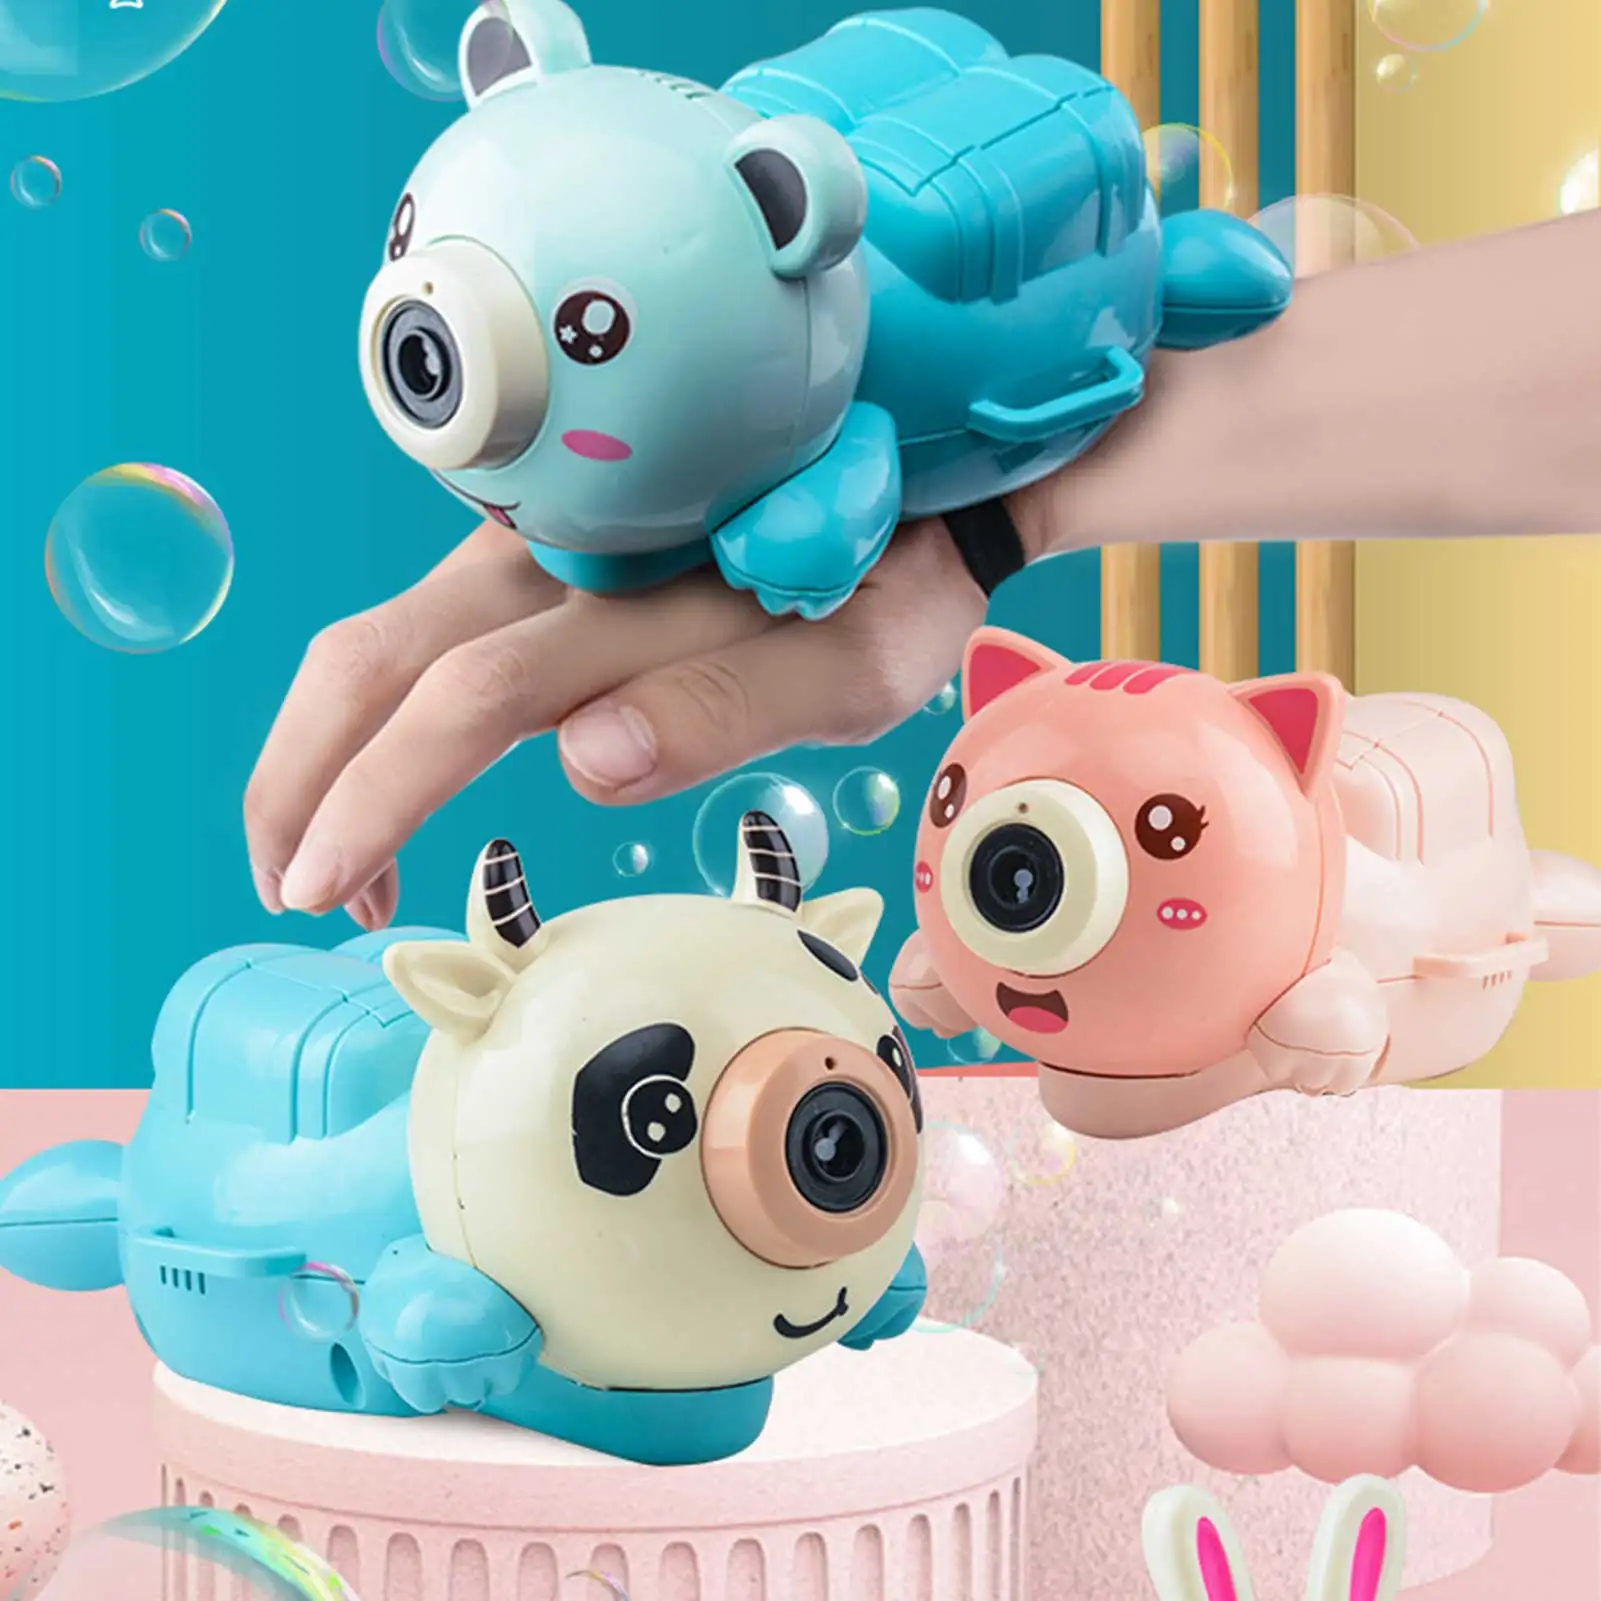 

New Cute Animal Bubble Machine Rabbit Bear Automatic Soap Water Anti LeakageBubble Blower Music Outdoor Toy For Kids D50